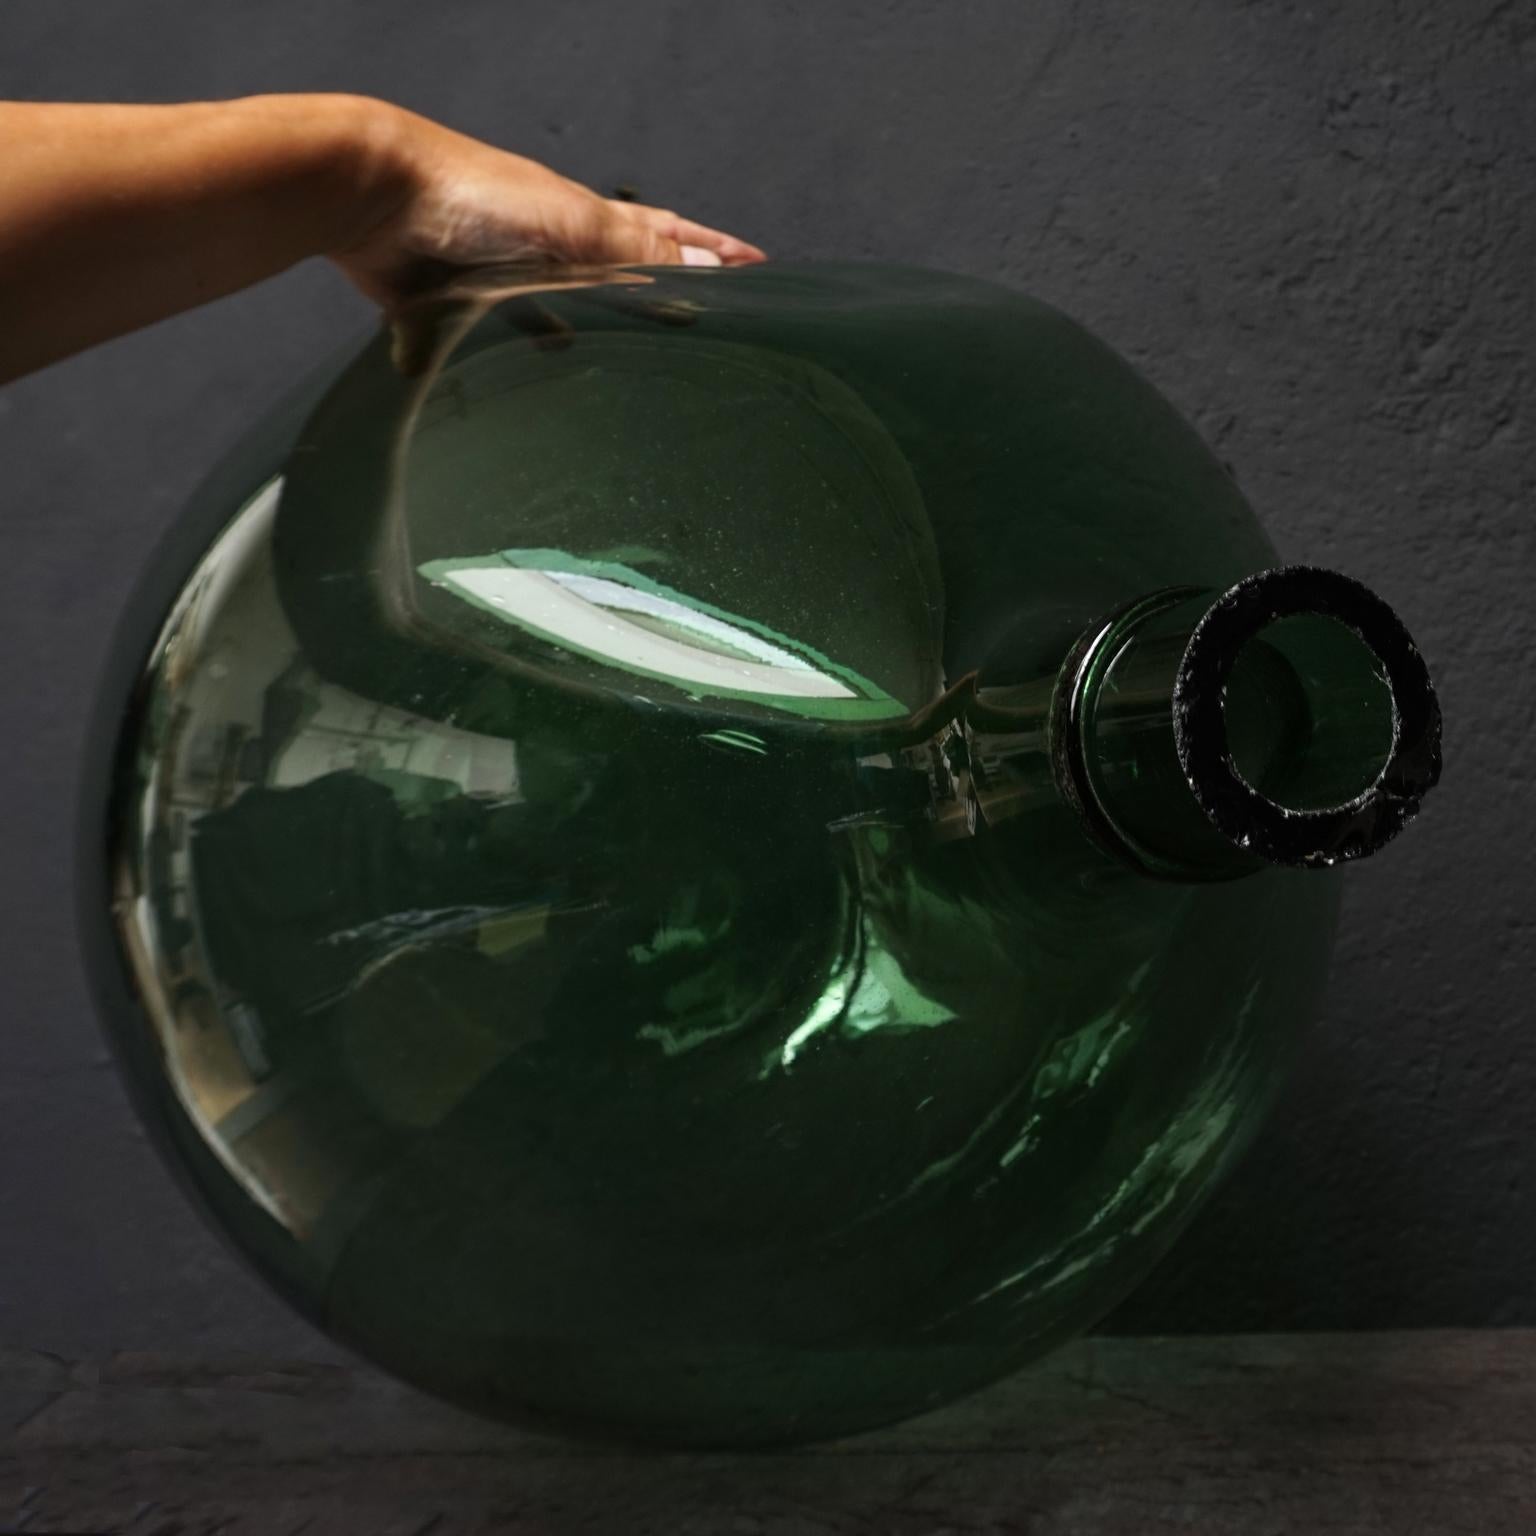 Hand blown in a globular or large ballon form with hand added bottlenecks and cut rim
Wonderful shade of green, hand blown wine bottle, also known as Dame Jeanne, Demijohn, Carboy or Bonbonne bottle with a very nice 'dent' in the glass.

I also